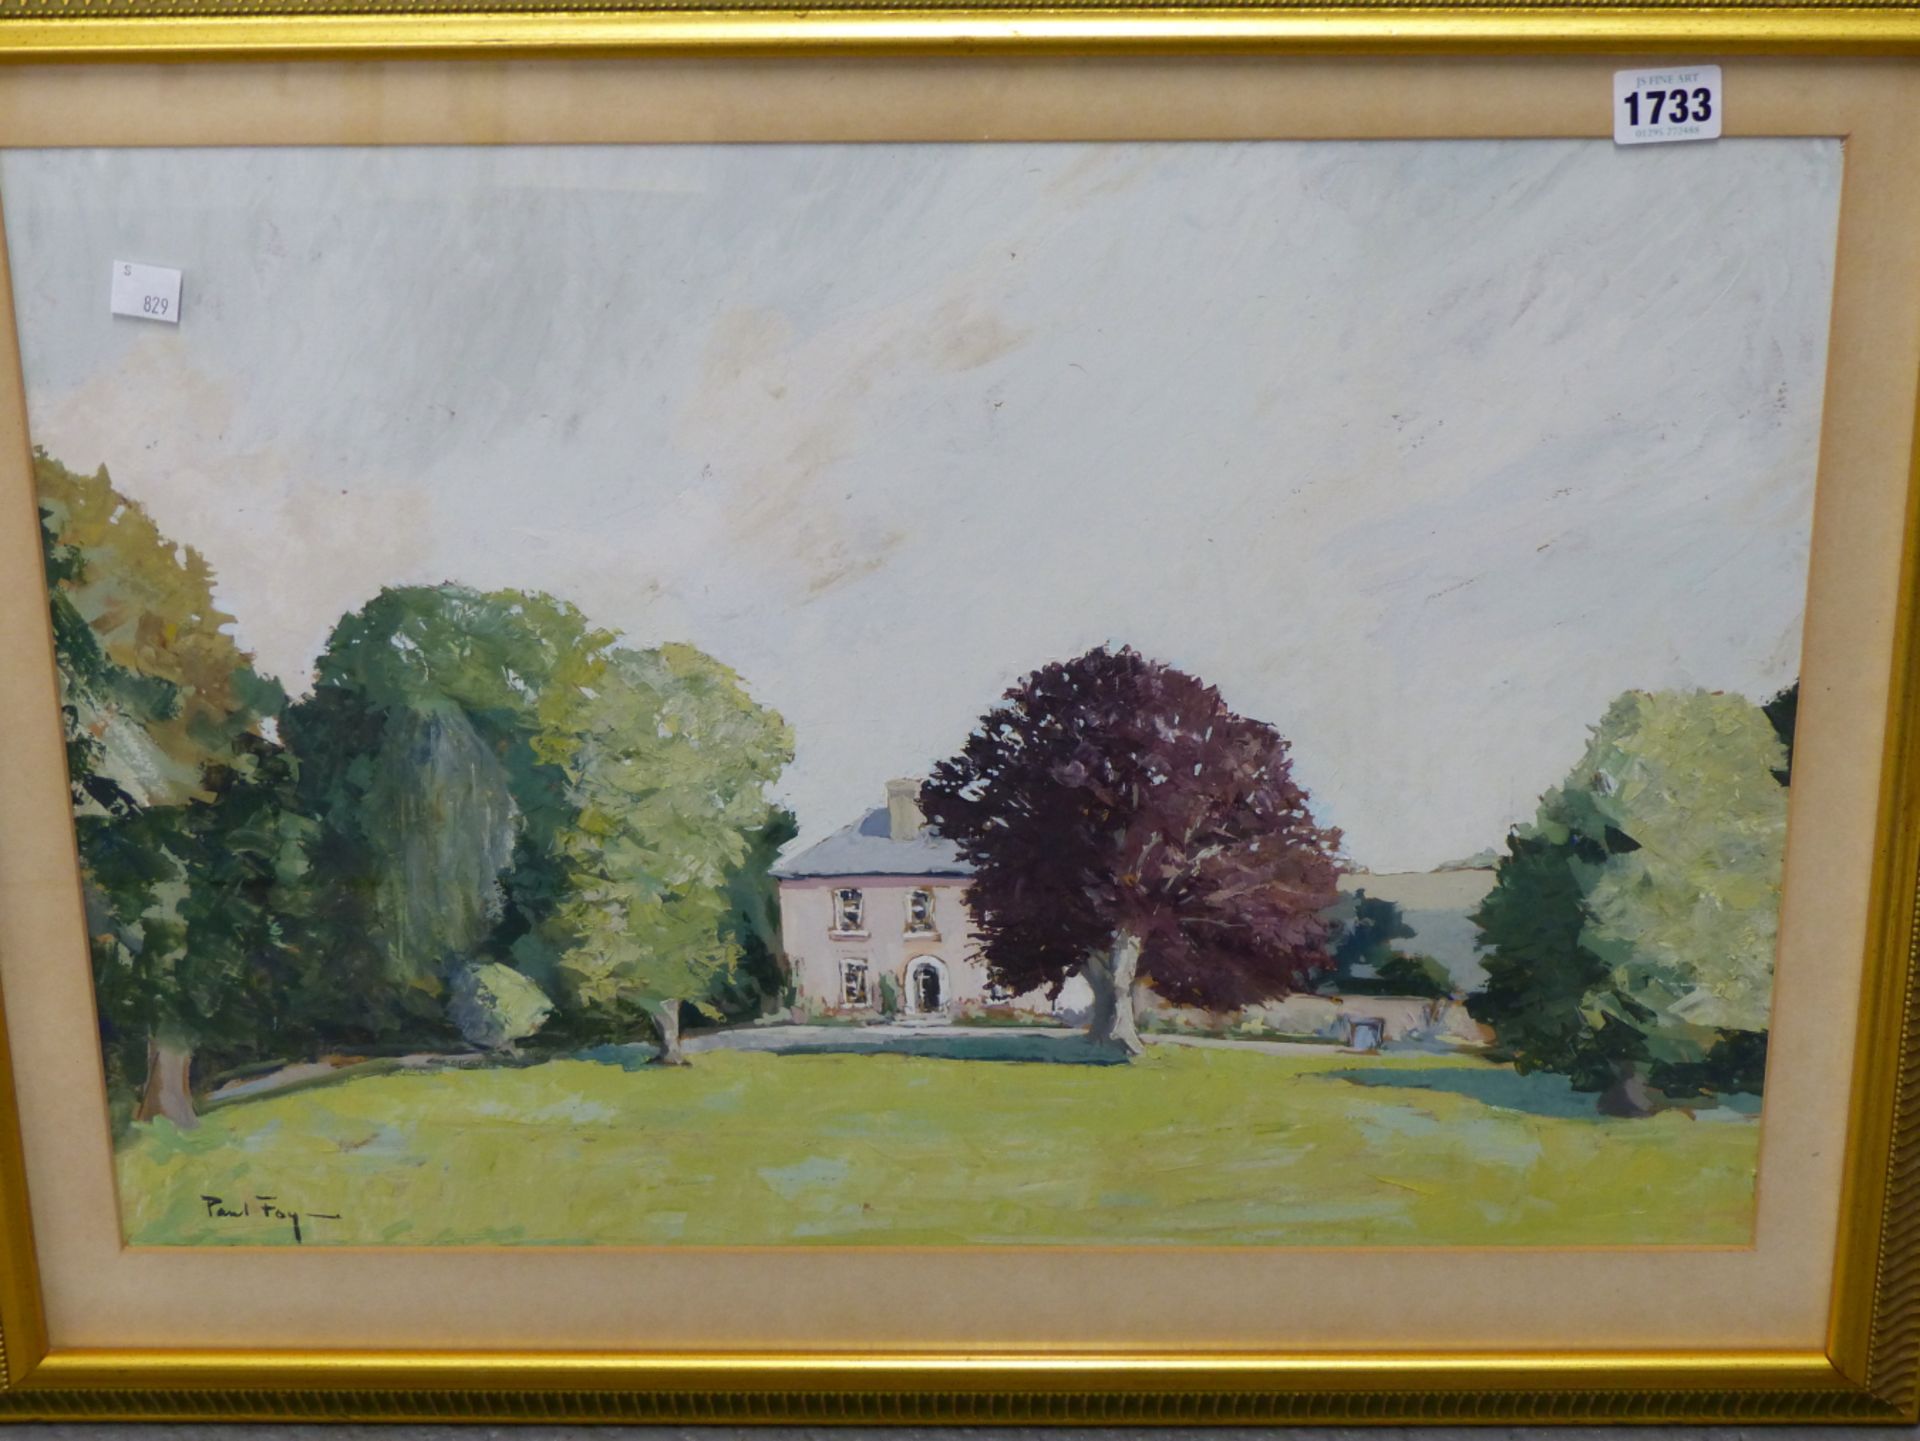 PAUL FOY, 20TH C. IRISH COUNTRY MANORHOUSE AND GROUNDS. OIL AND GOUACHE, 38 X 54.5 CM. - Image 2 of 5